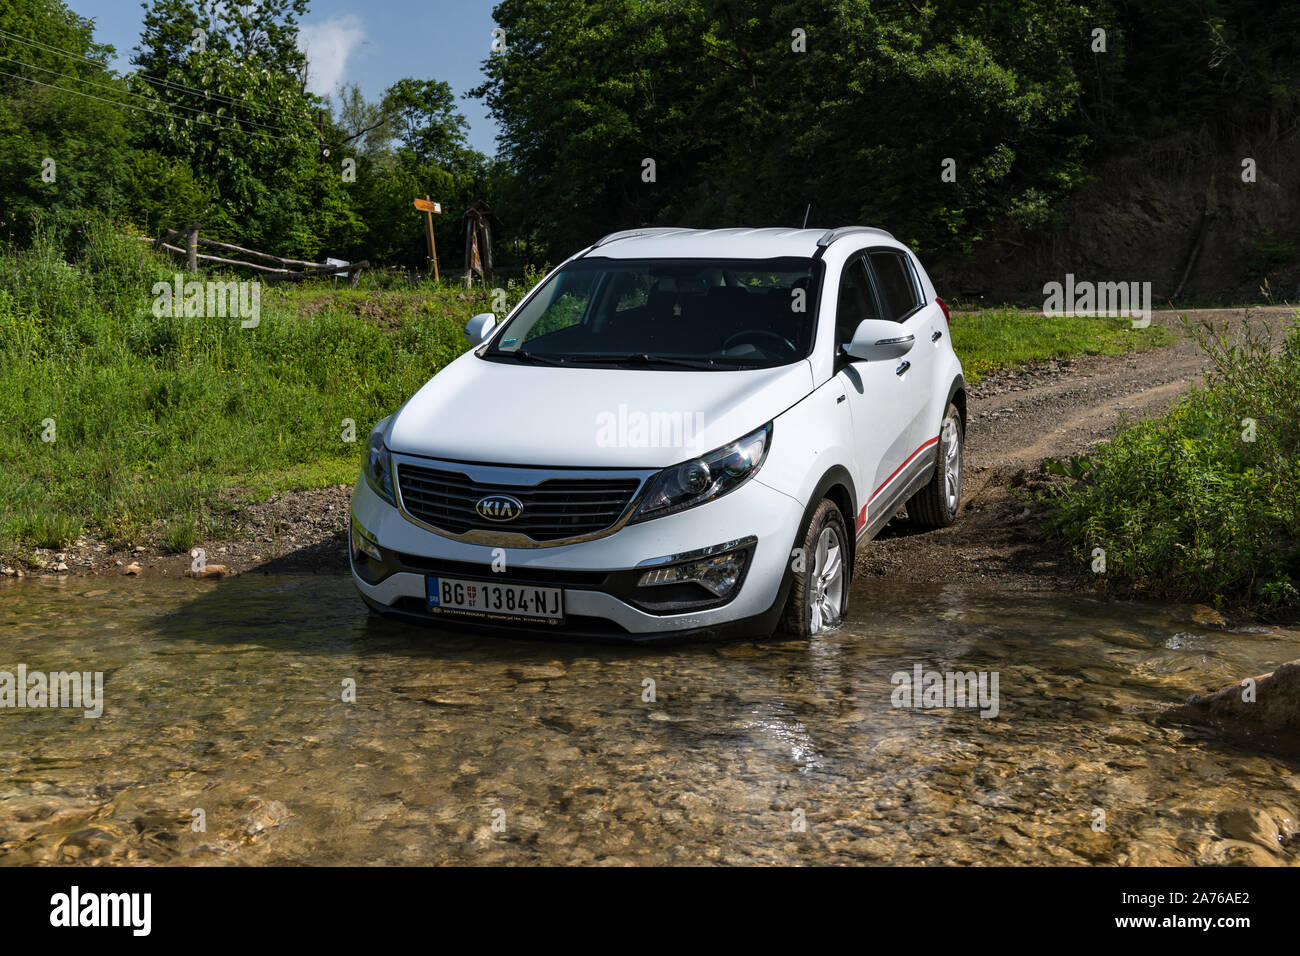 Kia Sportage 2.0 CRDI awd or 4x4, white color, crosses the stream ( creeks ), with a very steep approach, and slippery rocks below. SUV car in water Stock Photo